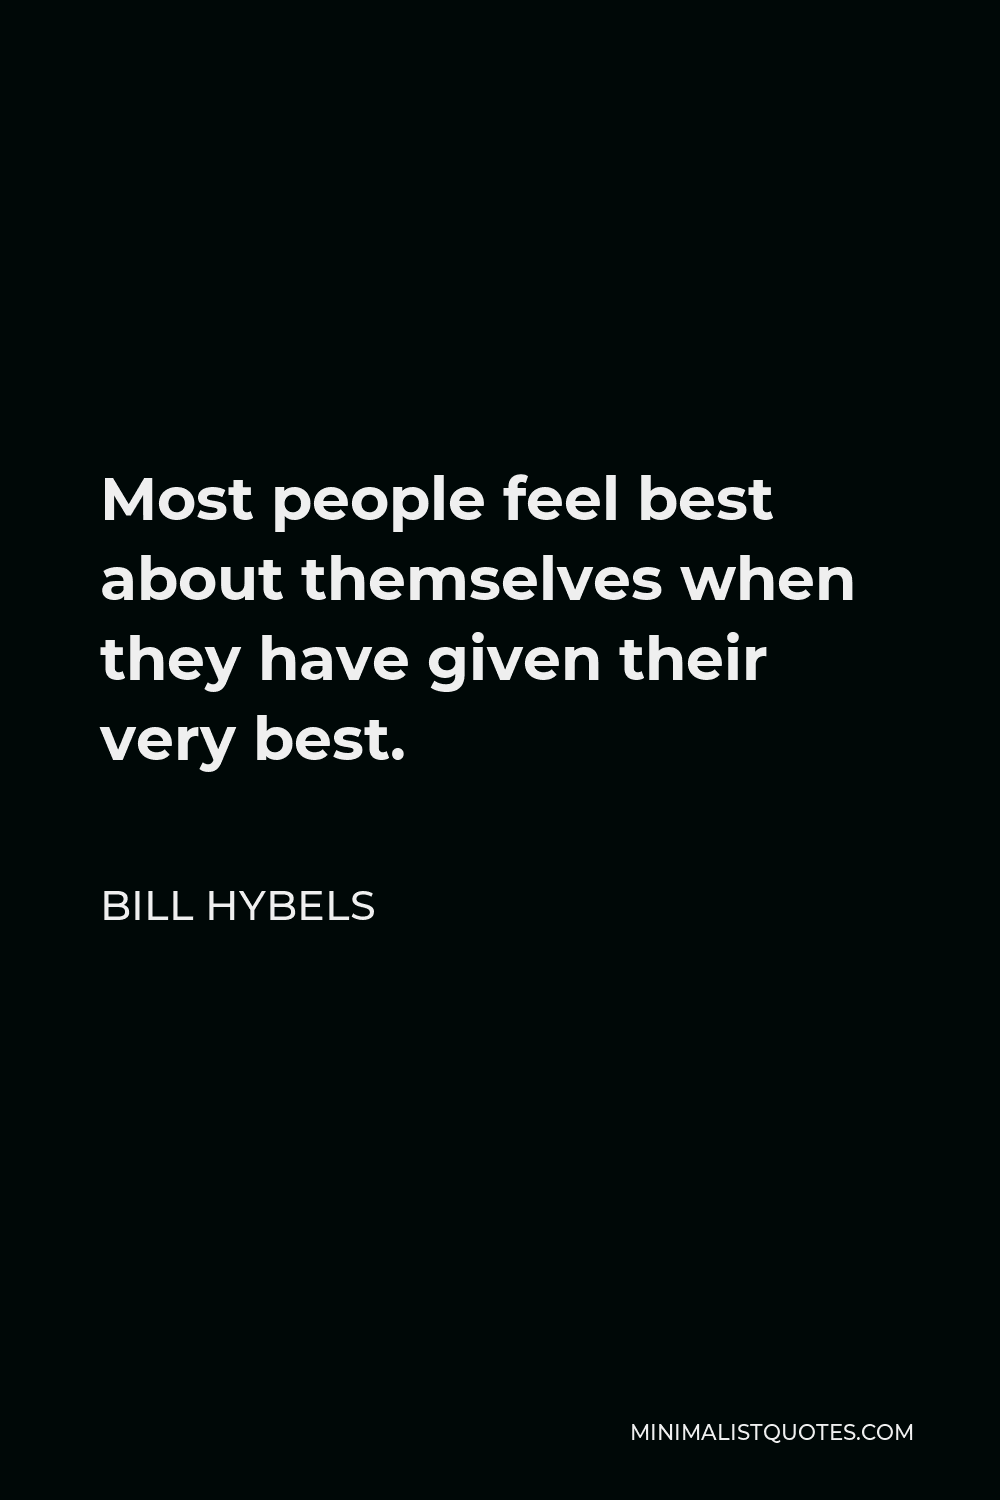 Bill Hybels Quote - Most people feel best about themselves when they have given their very best.